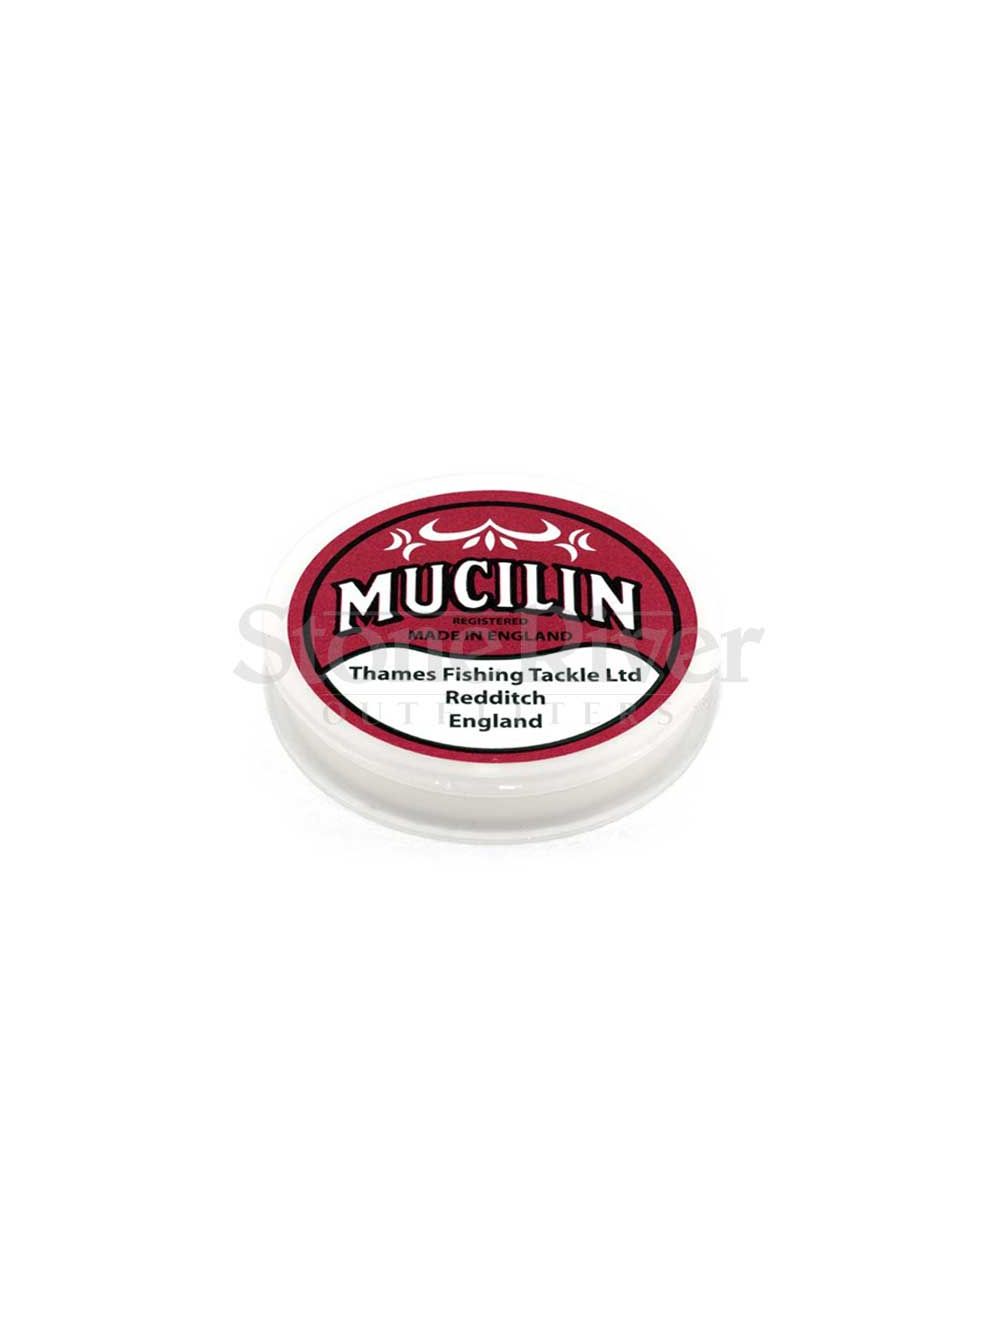 Mucilin Line Grease Floatant Trout Fly Fishing 